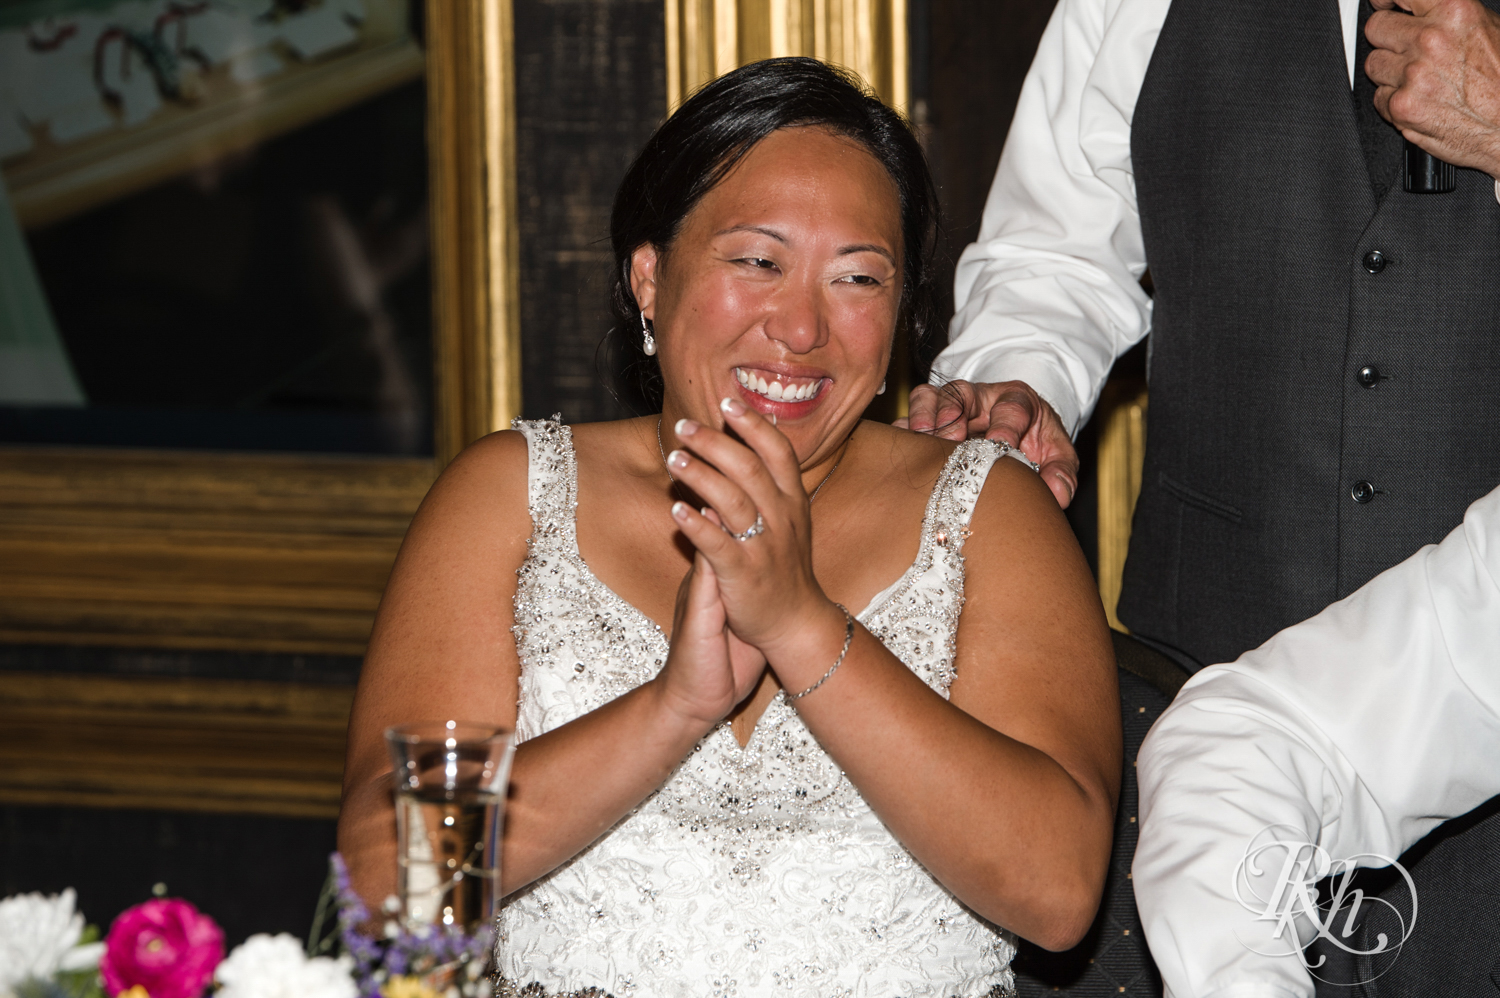 Bride and groom laugh during wedding reception at Kellerman's Event Center in White Bear Lake, Minnesota.